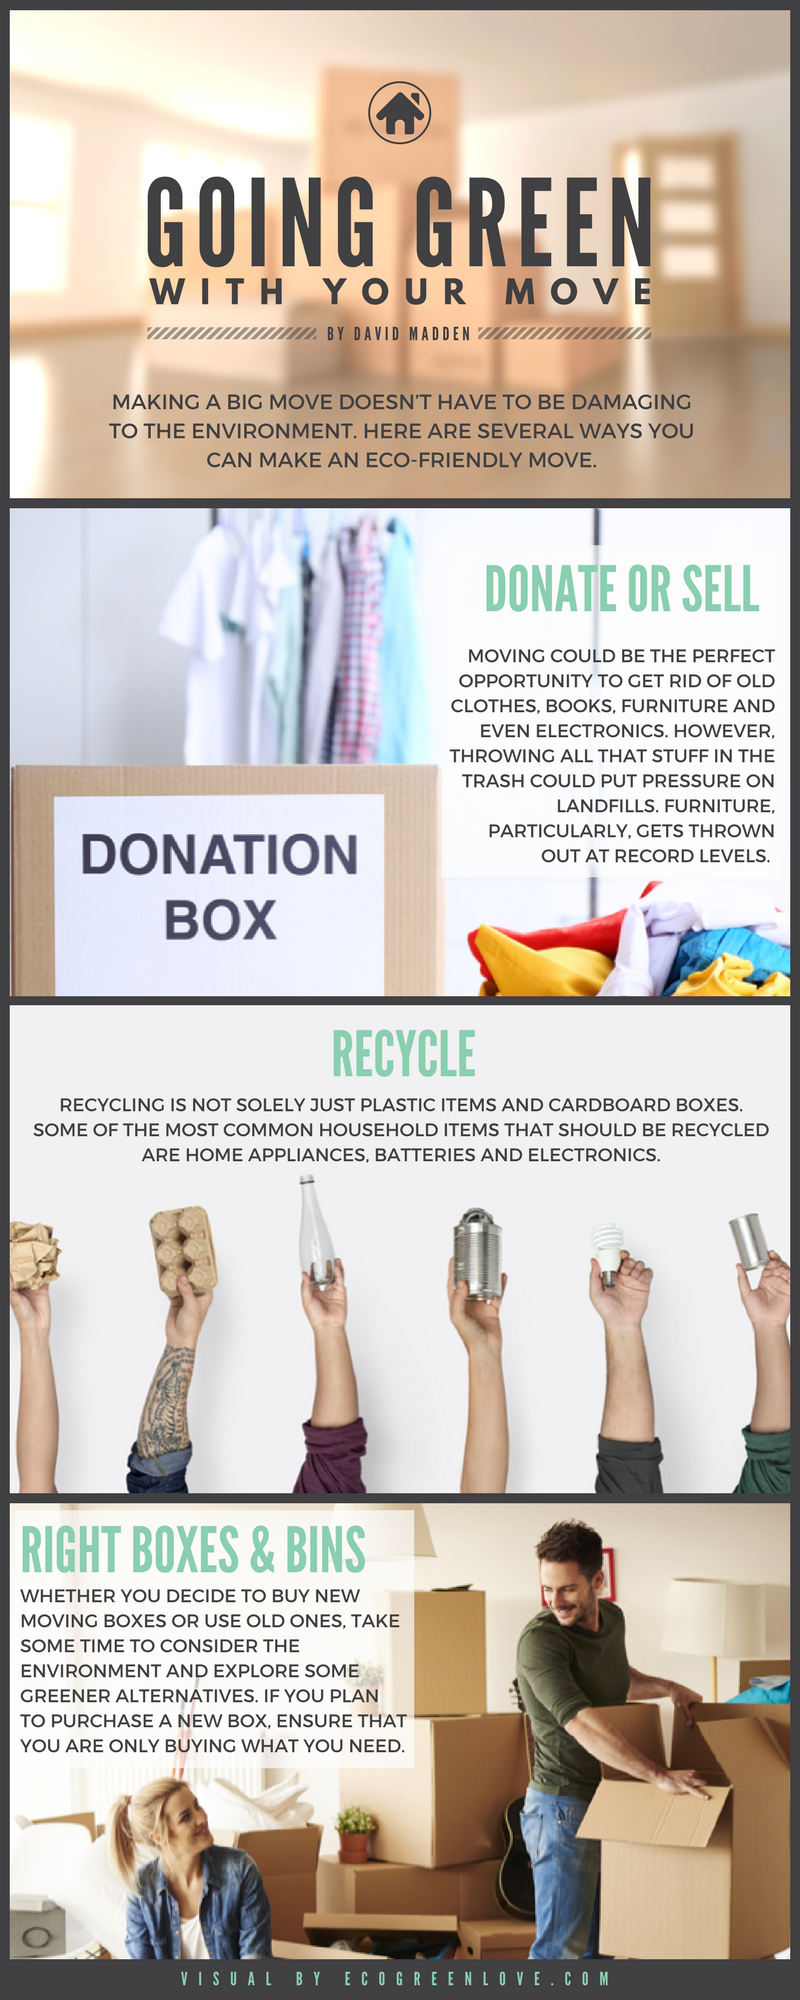 Going Green with your Move [Infographic] | ecogreenlove